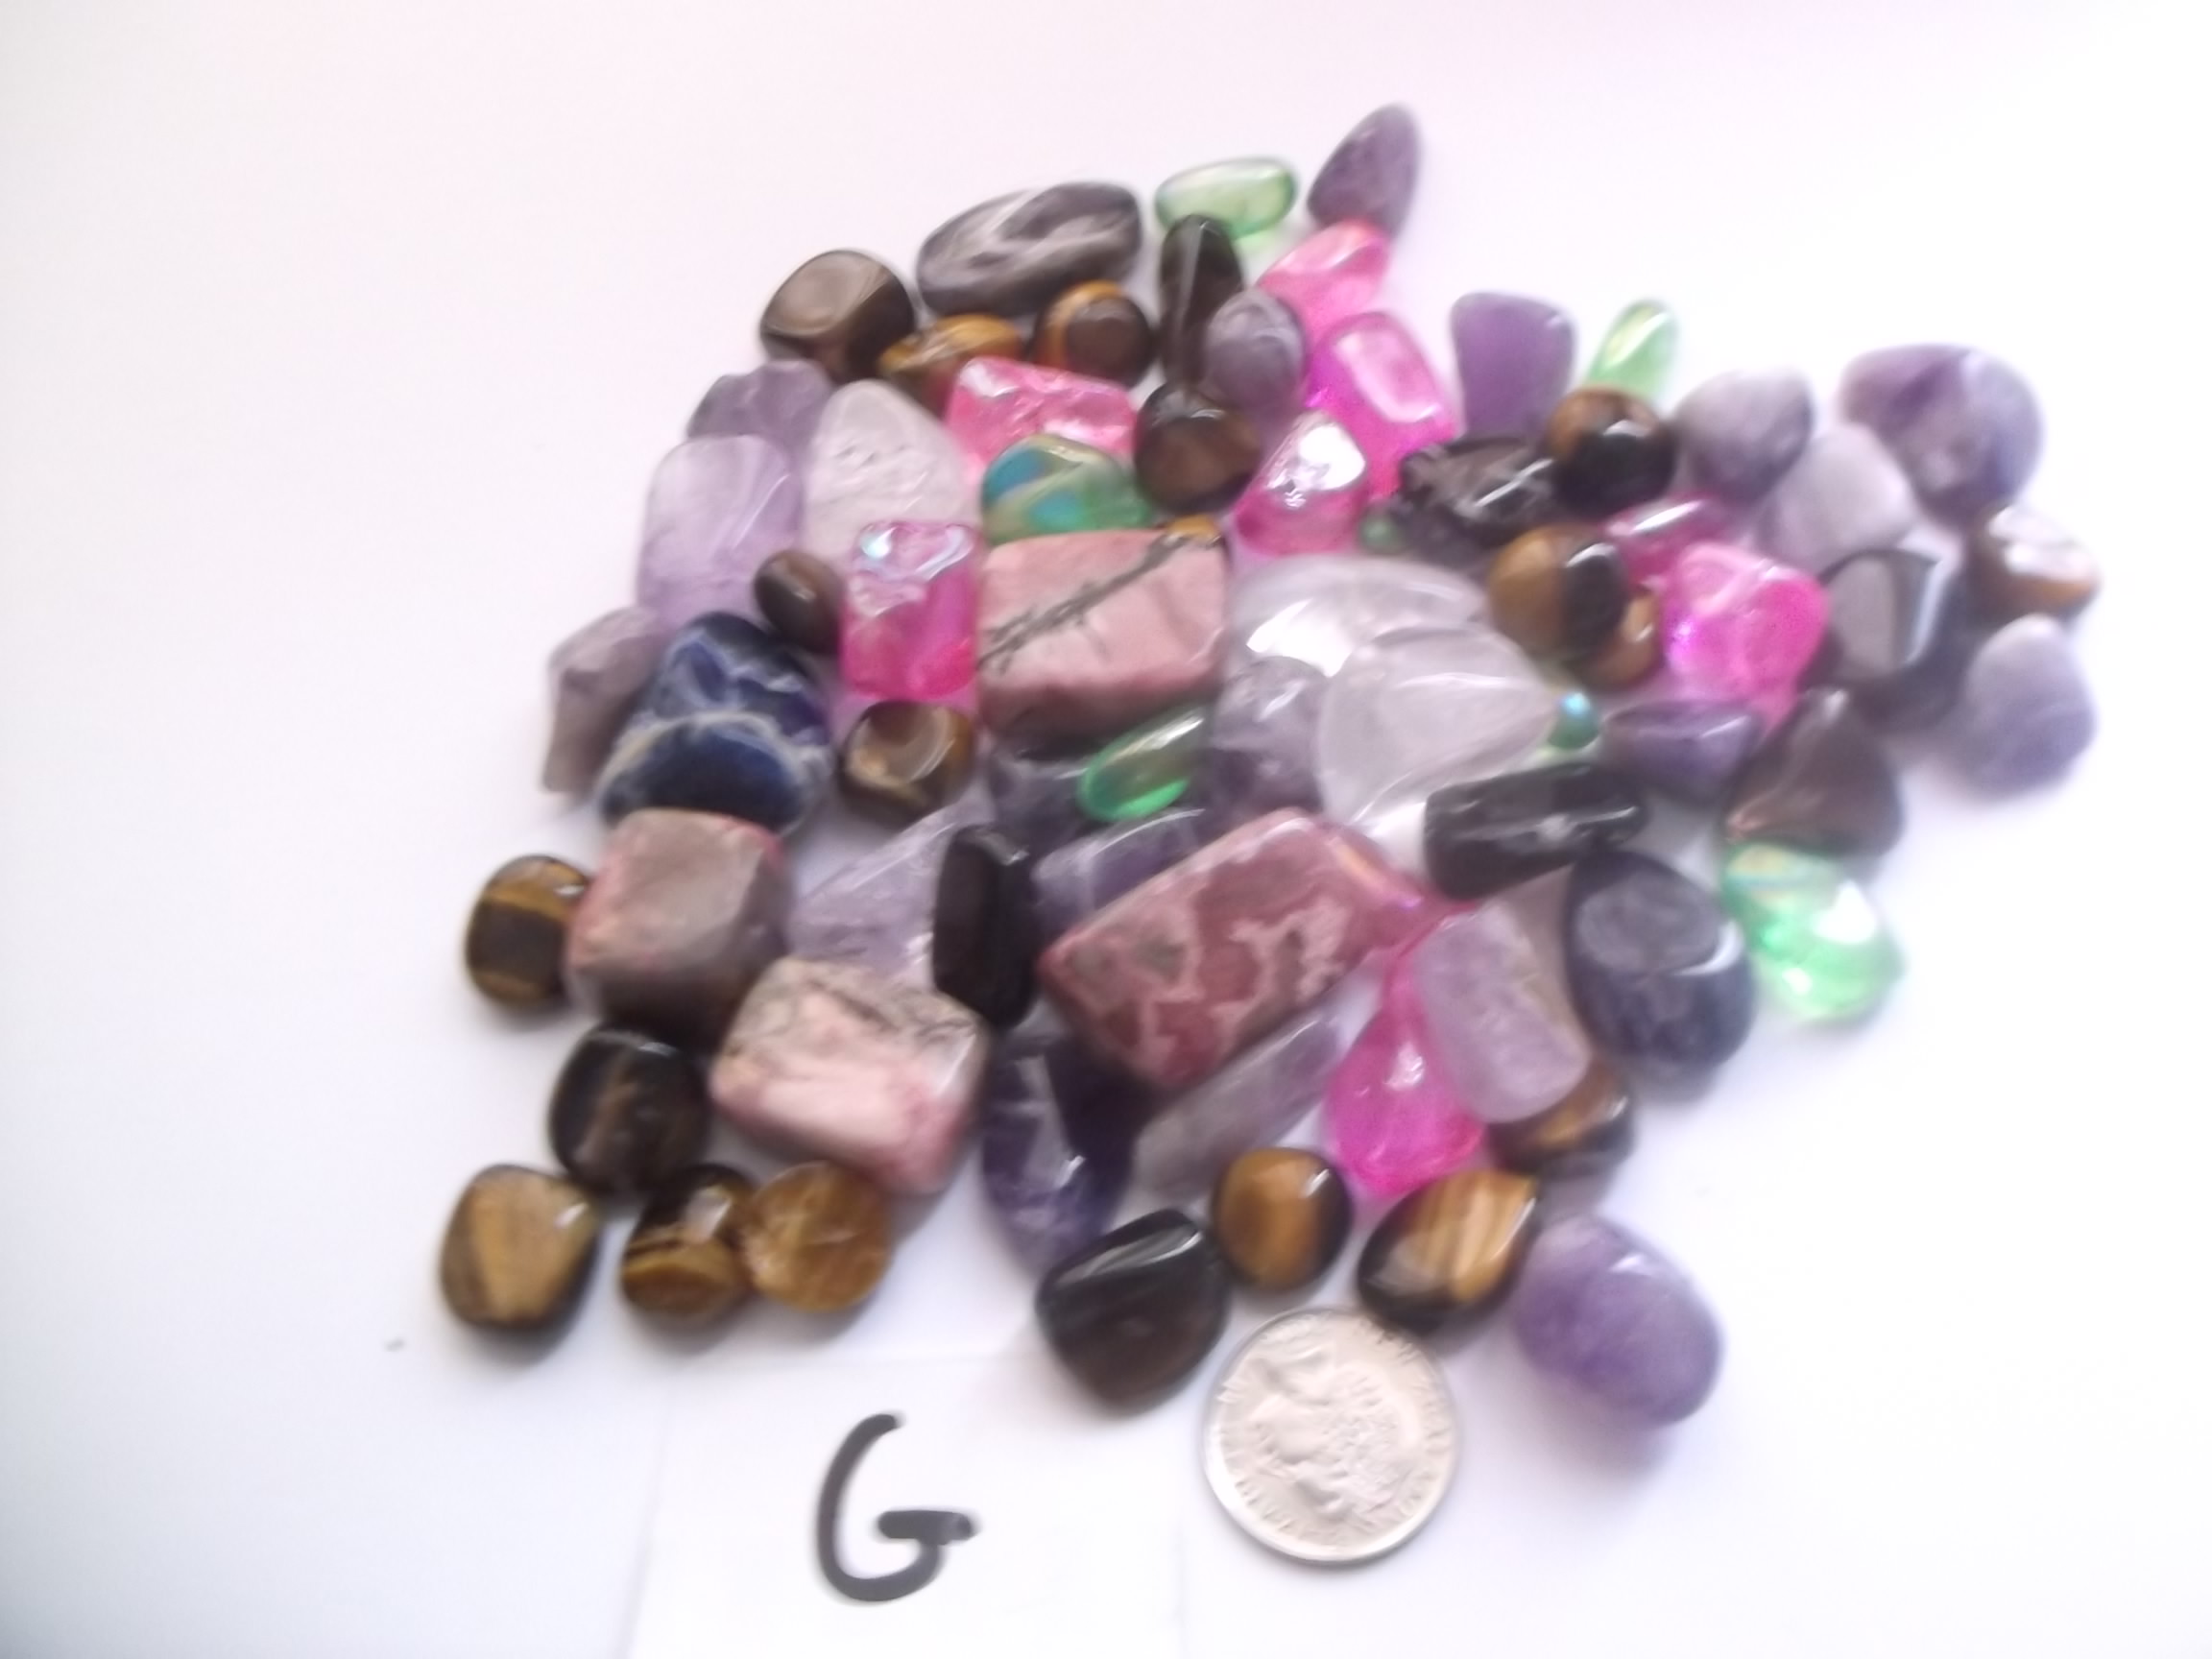 500 grams mixed size tumble 15 % off at check out - NZ Gems